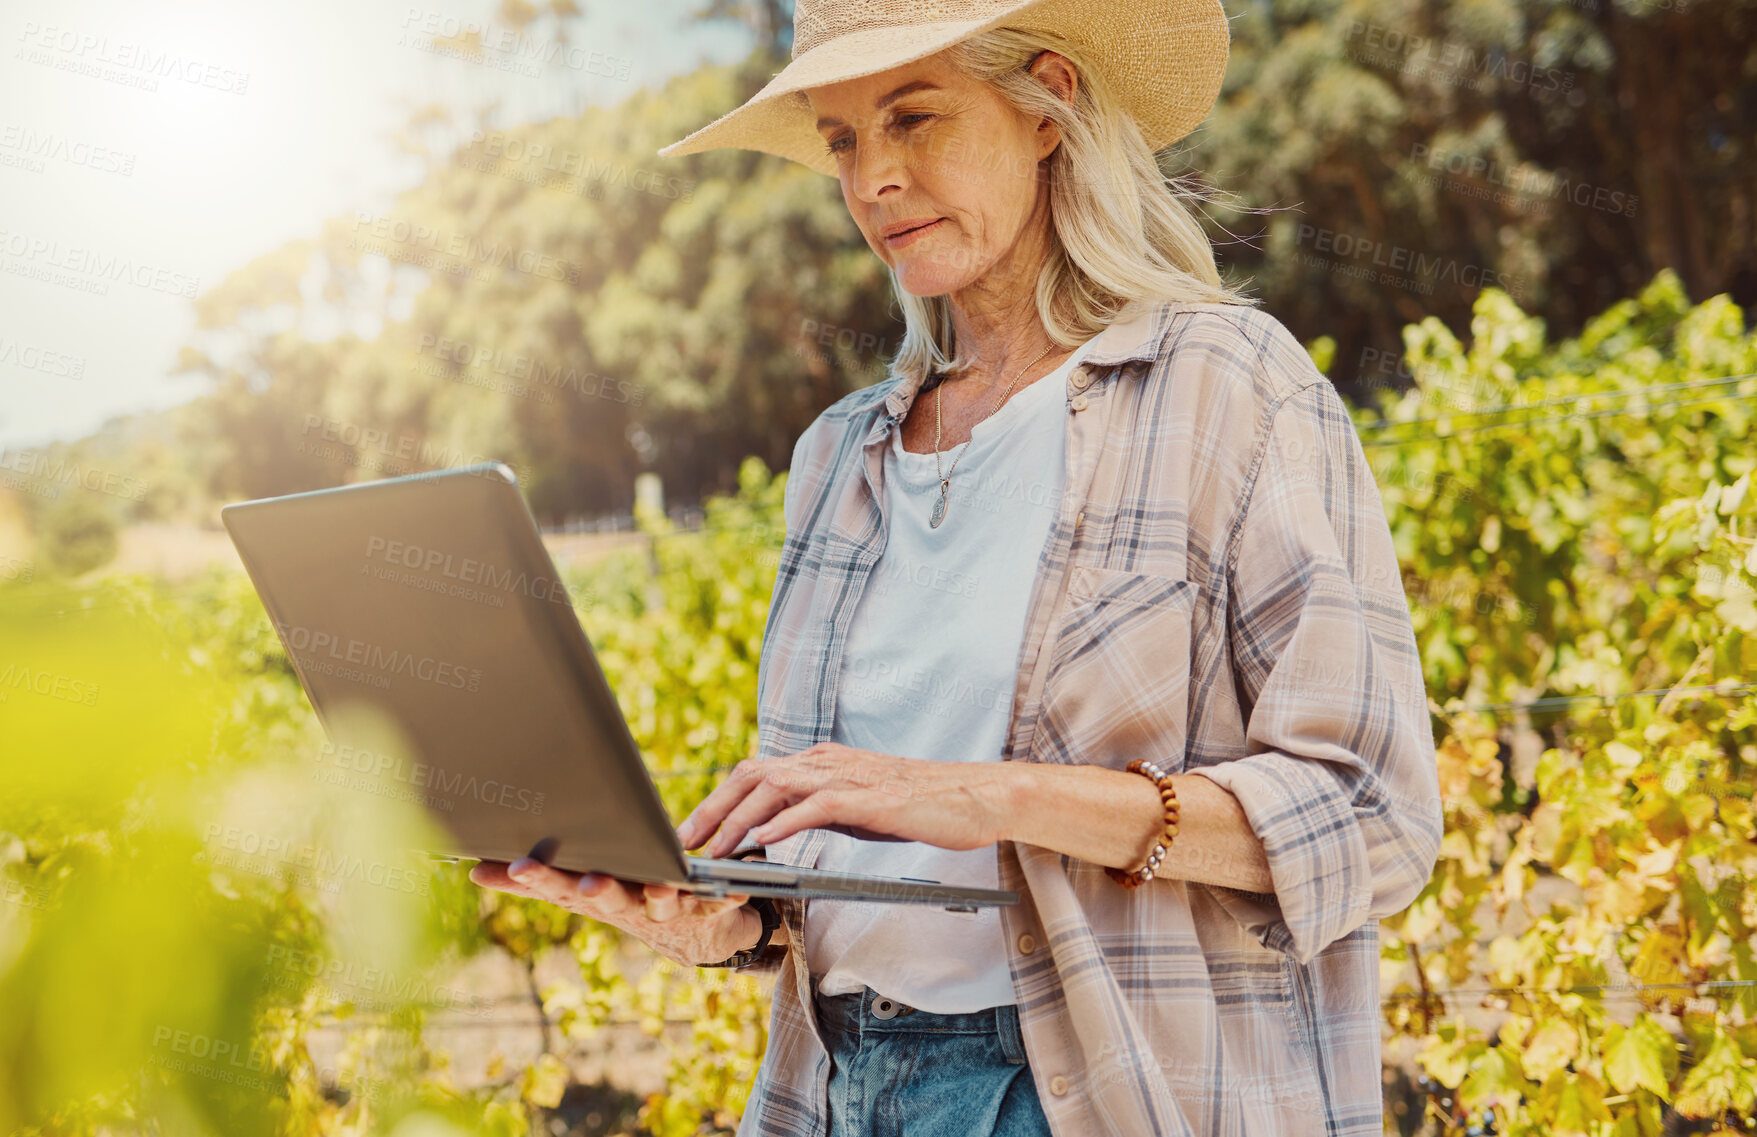 Buy stock photo One serious senior farmer holding and using a laptop on a vineyard. Elderly Caucasian woman browsing the internet around her crops and produce on wine farm in summer. Staying connected online on farm